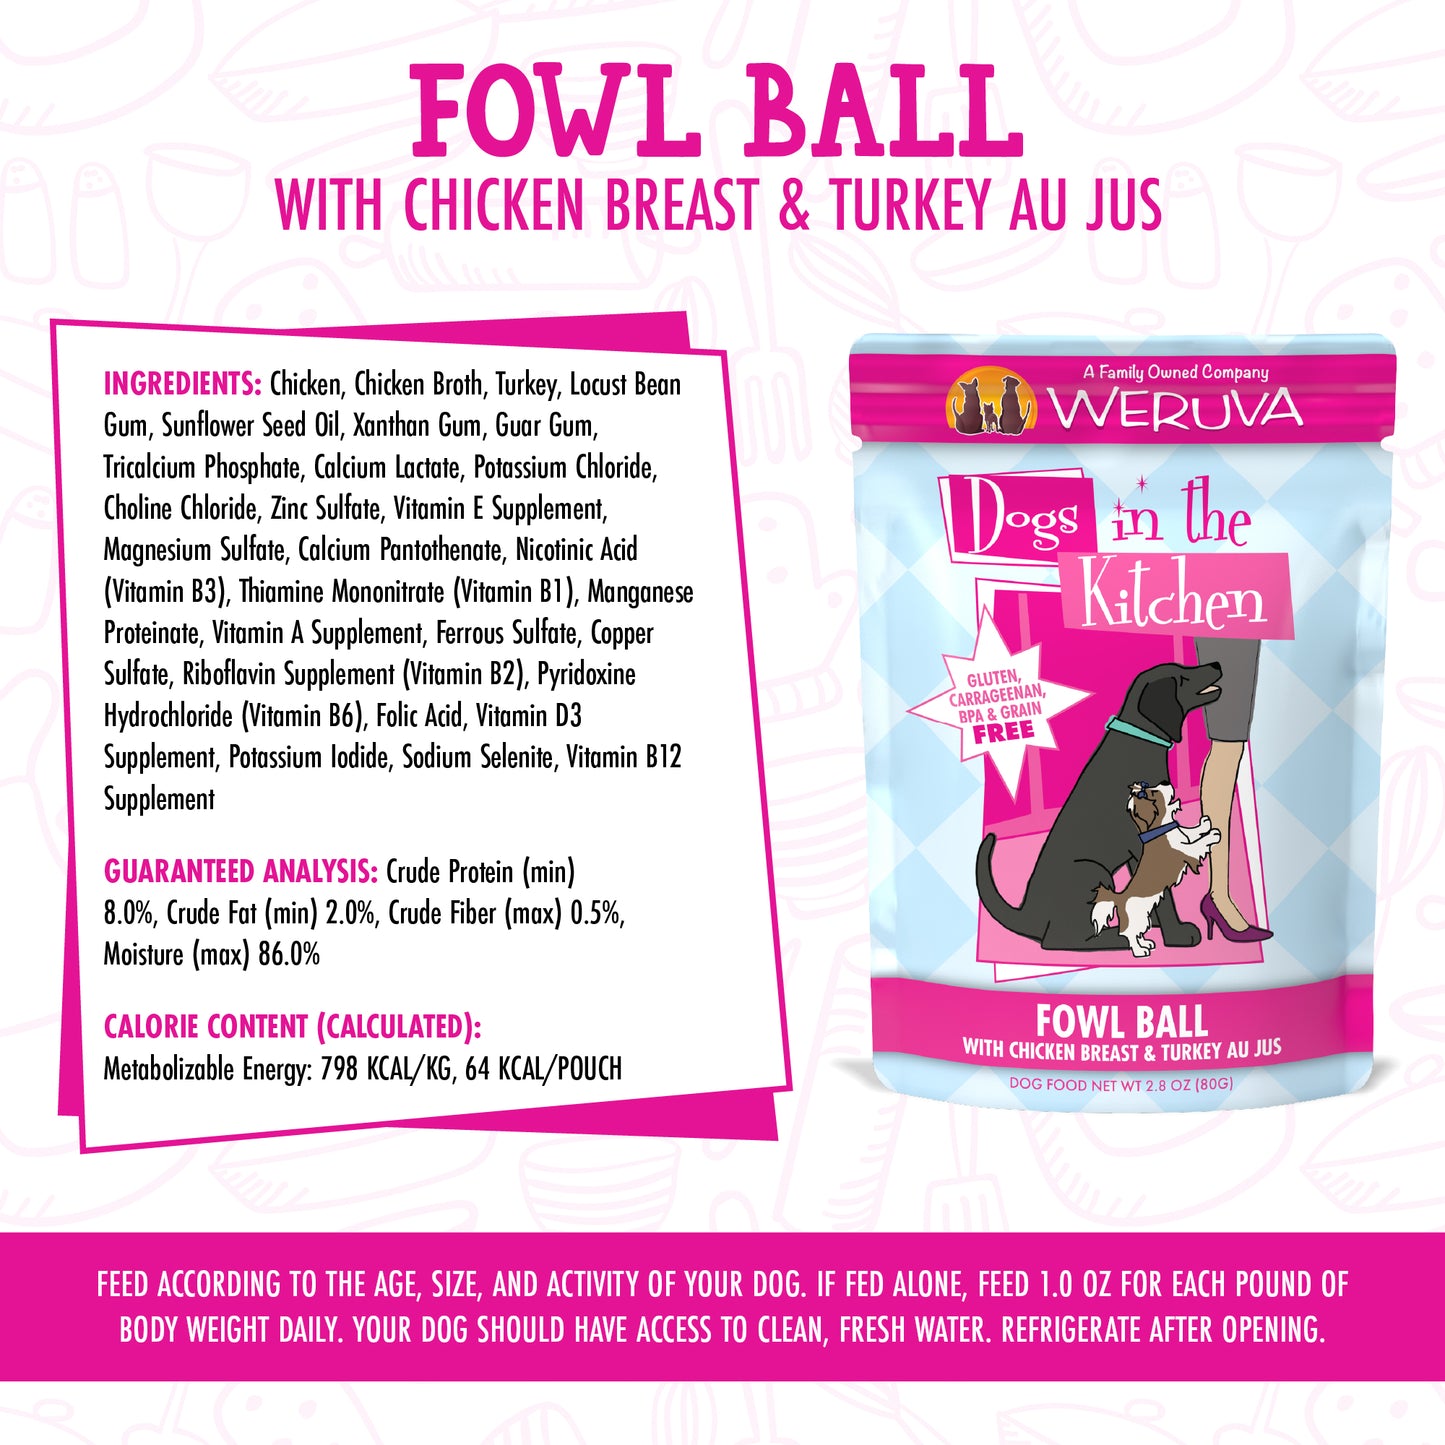 Dogs in the Kitchen "Fowl Ball" with Chicken & Turkey Au Jus (2.8 oz Pouch)